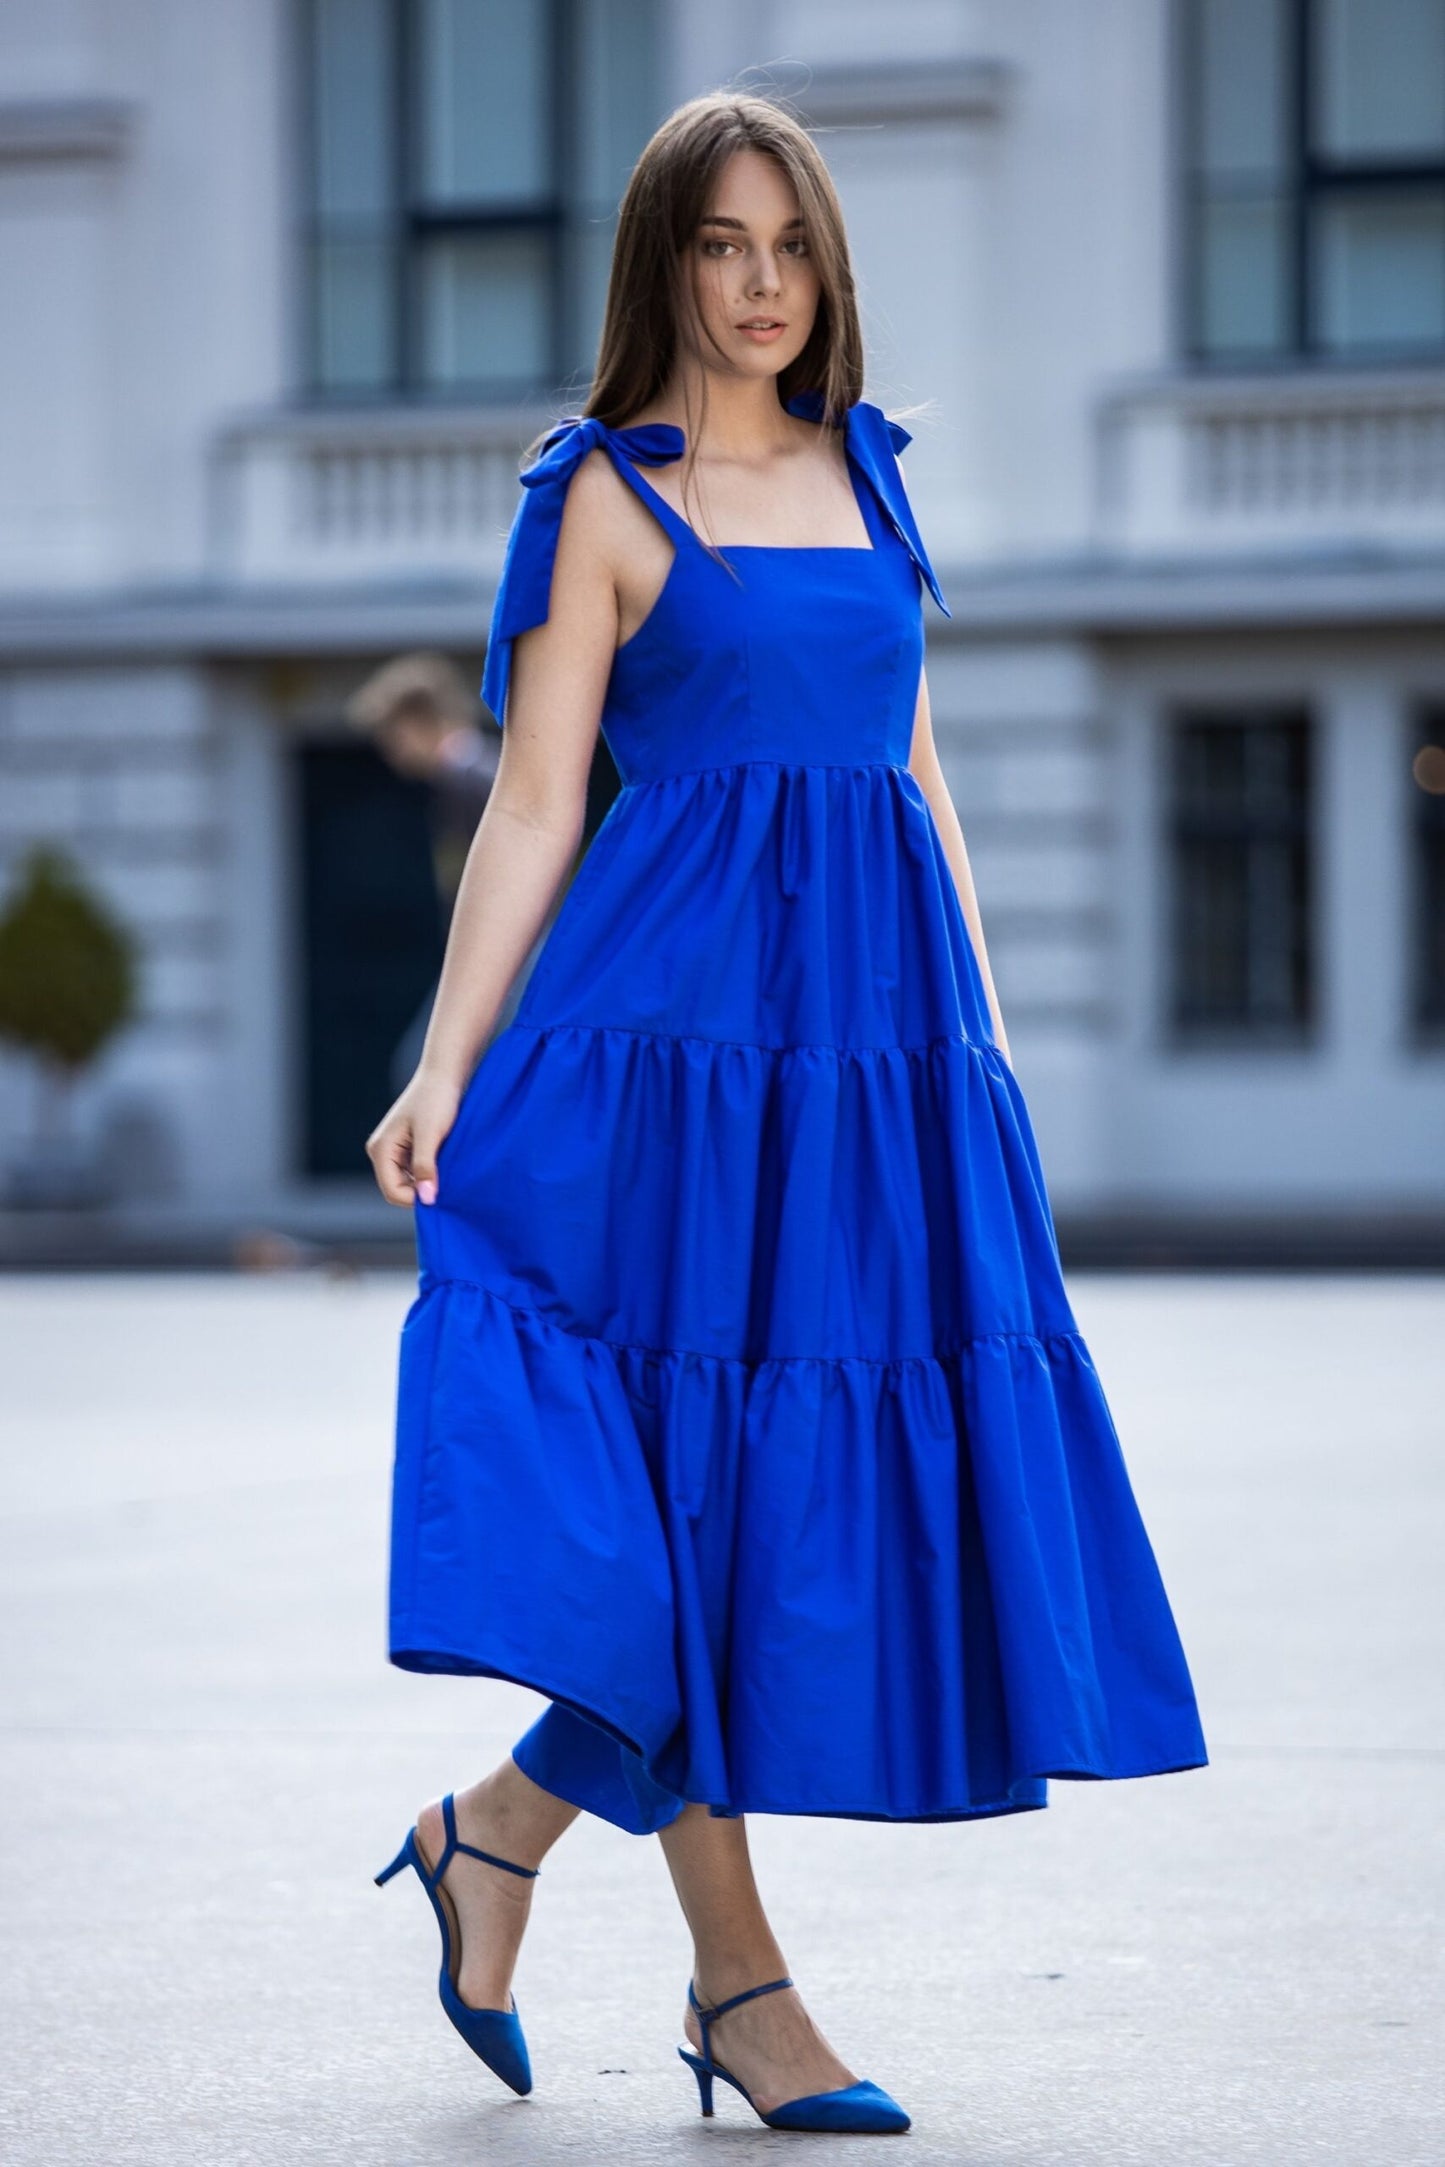 Blue organic cotton dress with bows